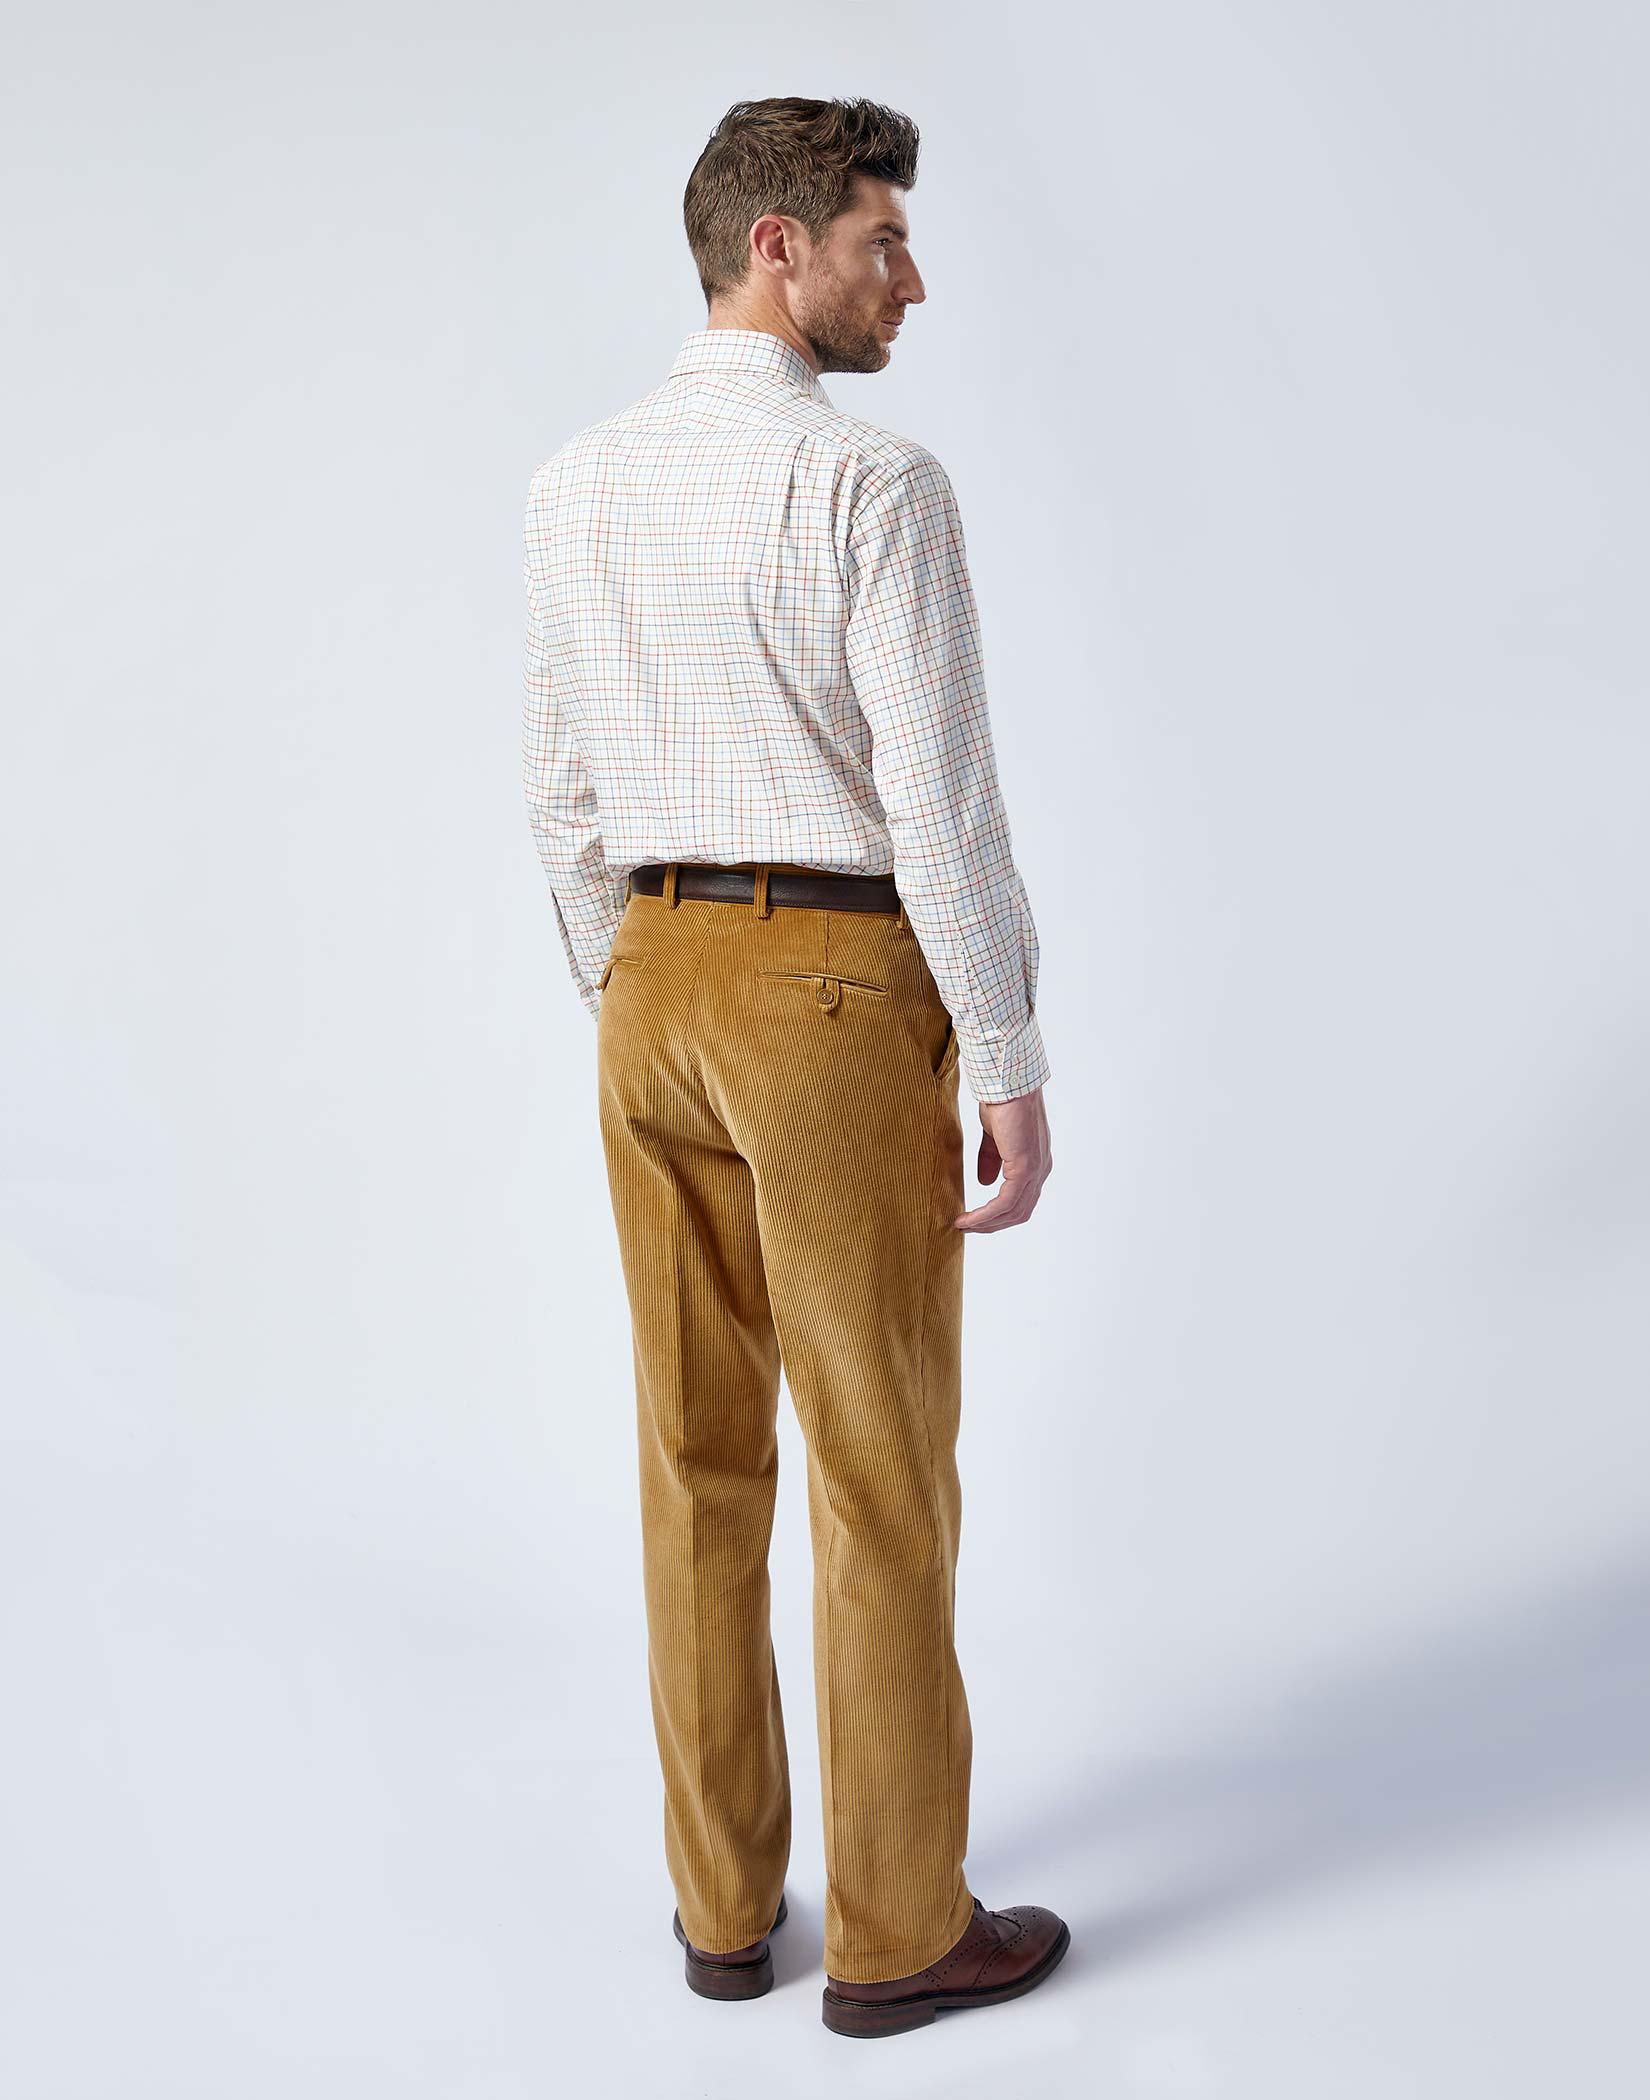 Buy Mens Jumbo Cord Trousers  Fast UK Delivery  Insight Clothing